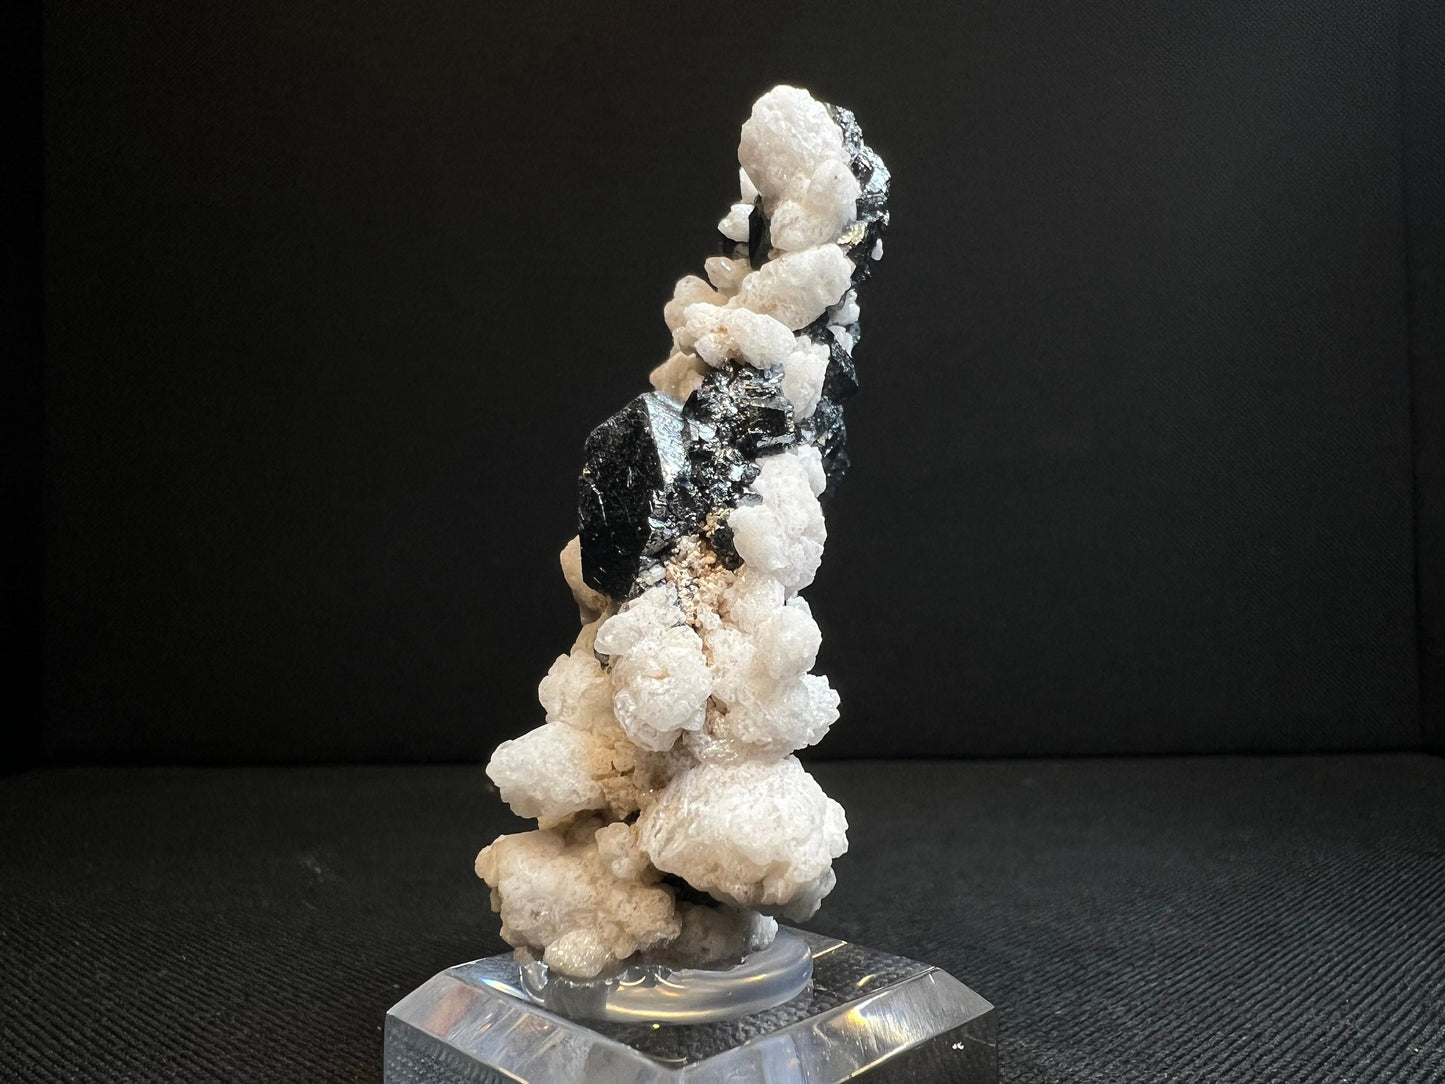 Hematite With Calcite From Wessels Mine, Northern Cape, South Africa- Collectors Piece, Home Decor